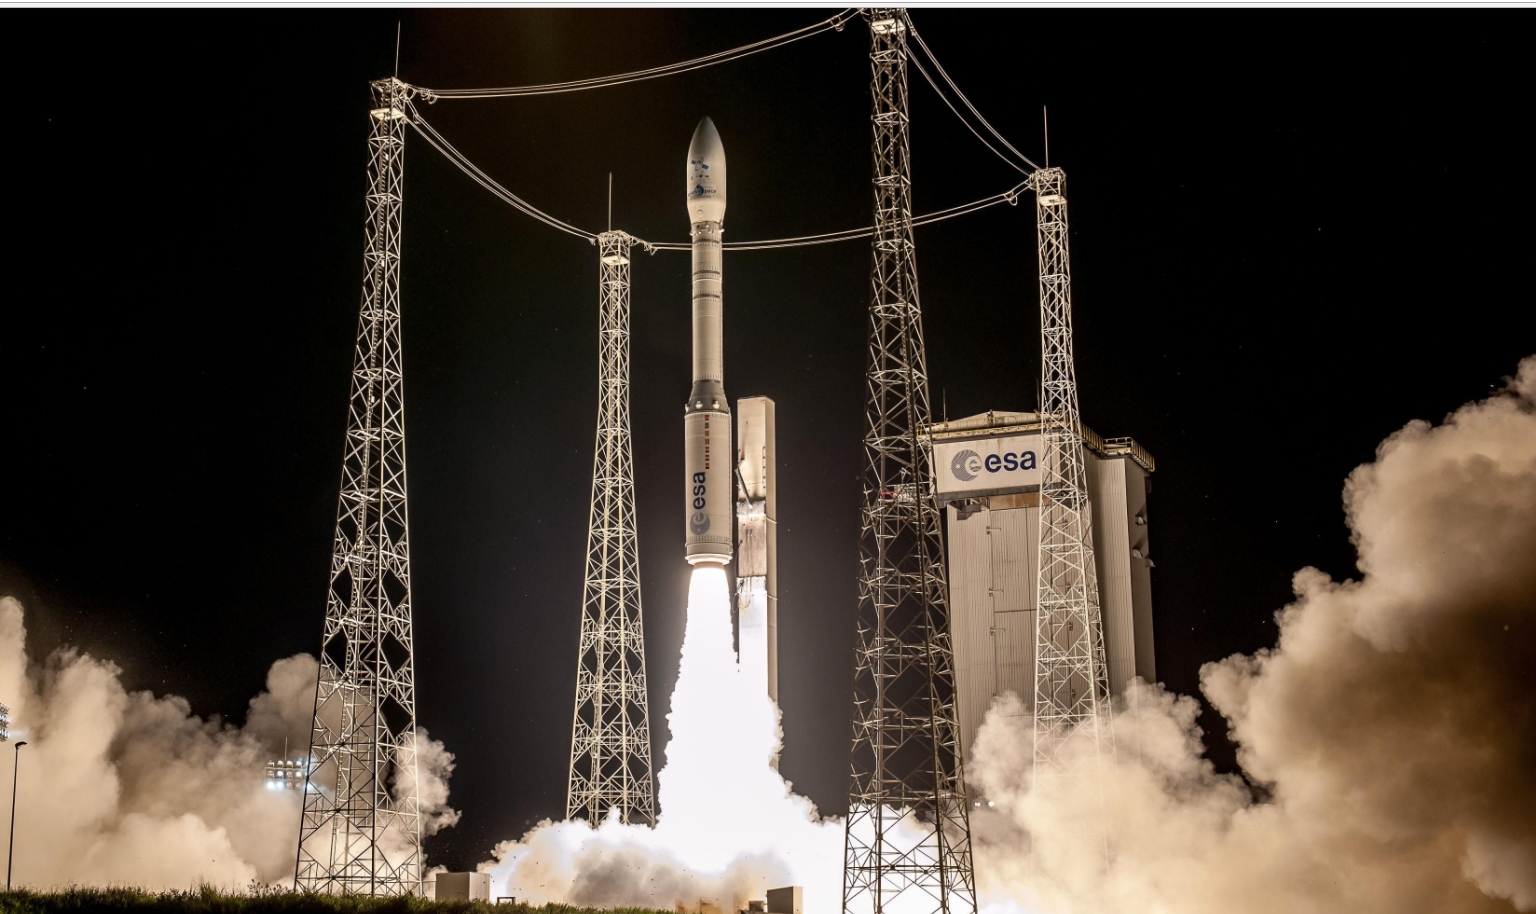 European commercial rocket launchers get ready to compete in the global space race